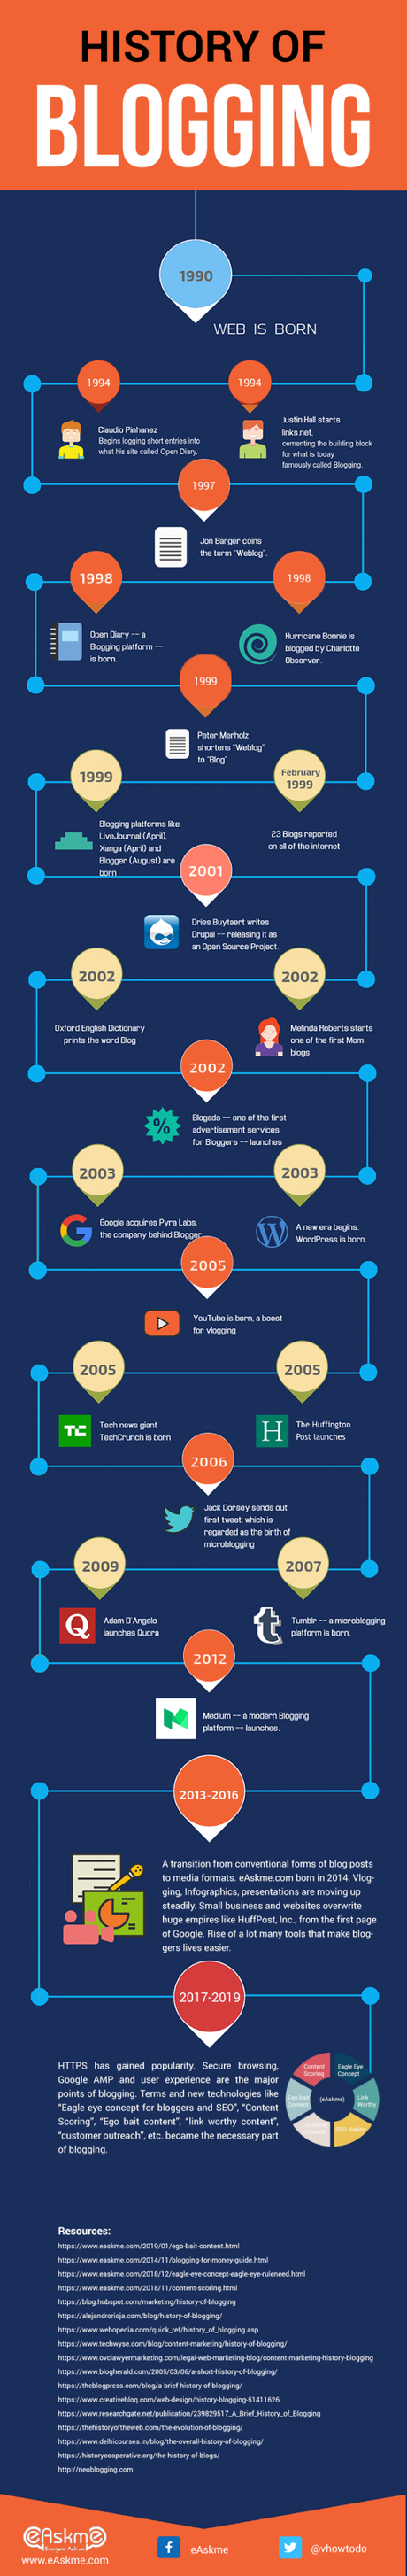 History of Blogging : An Infographic for Every Blogger